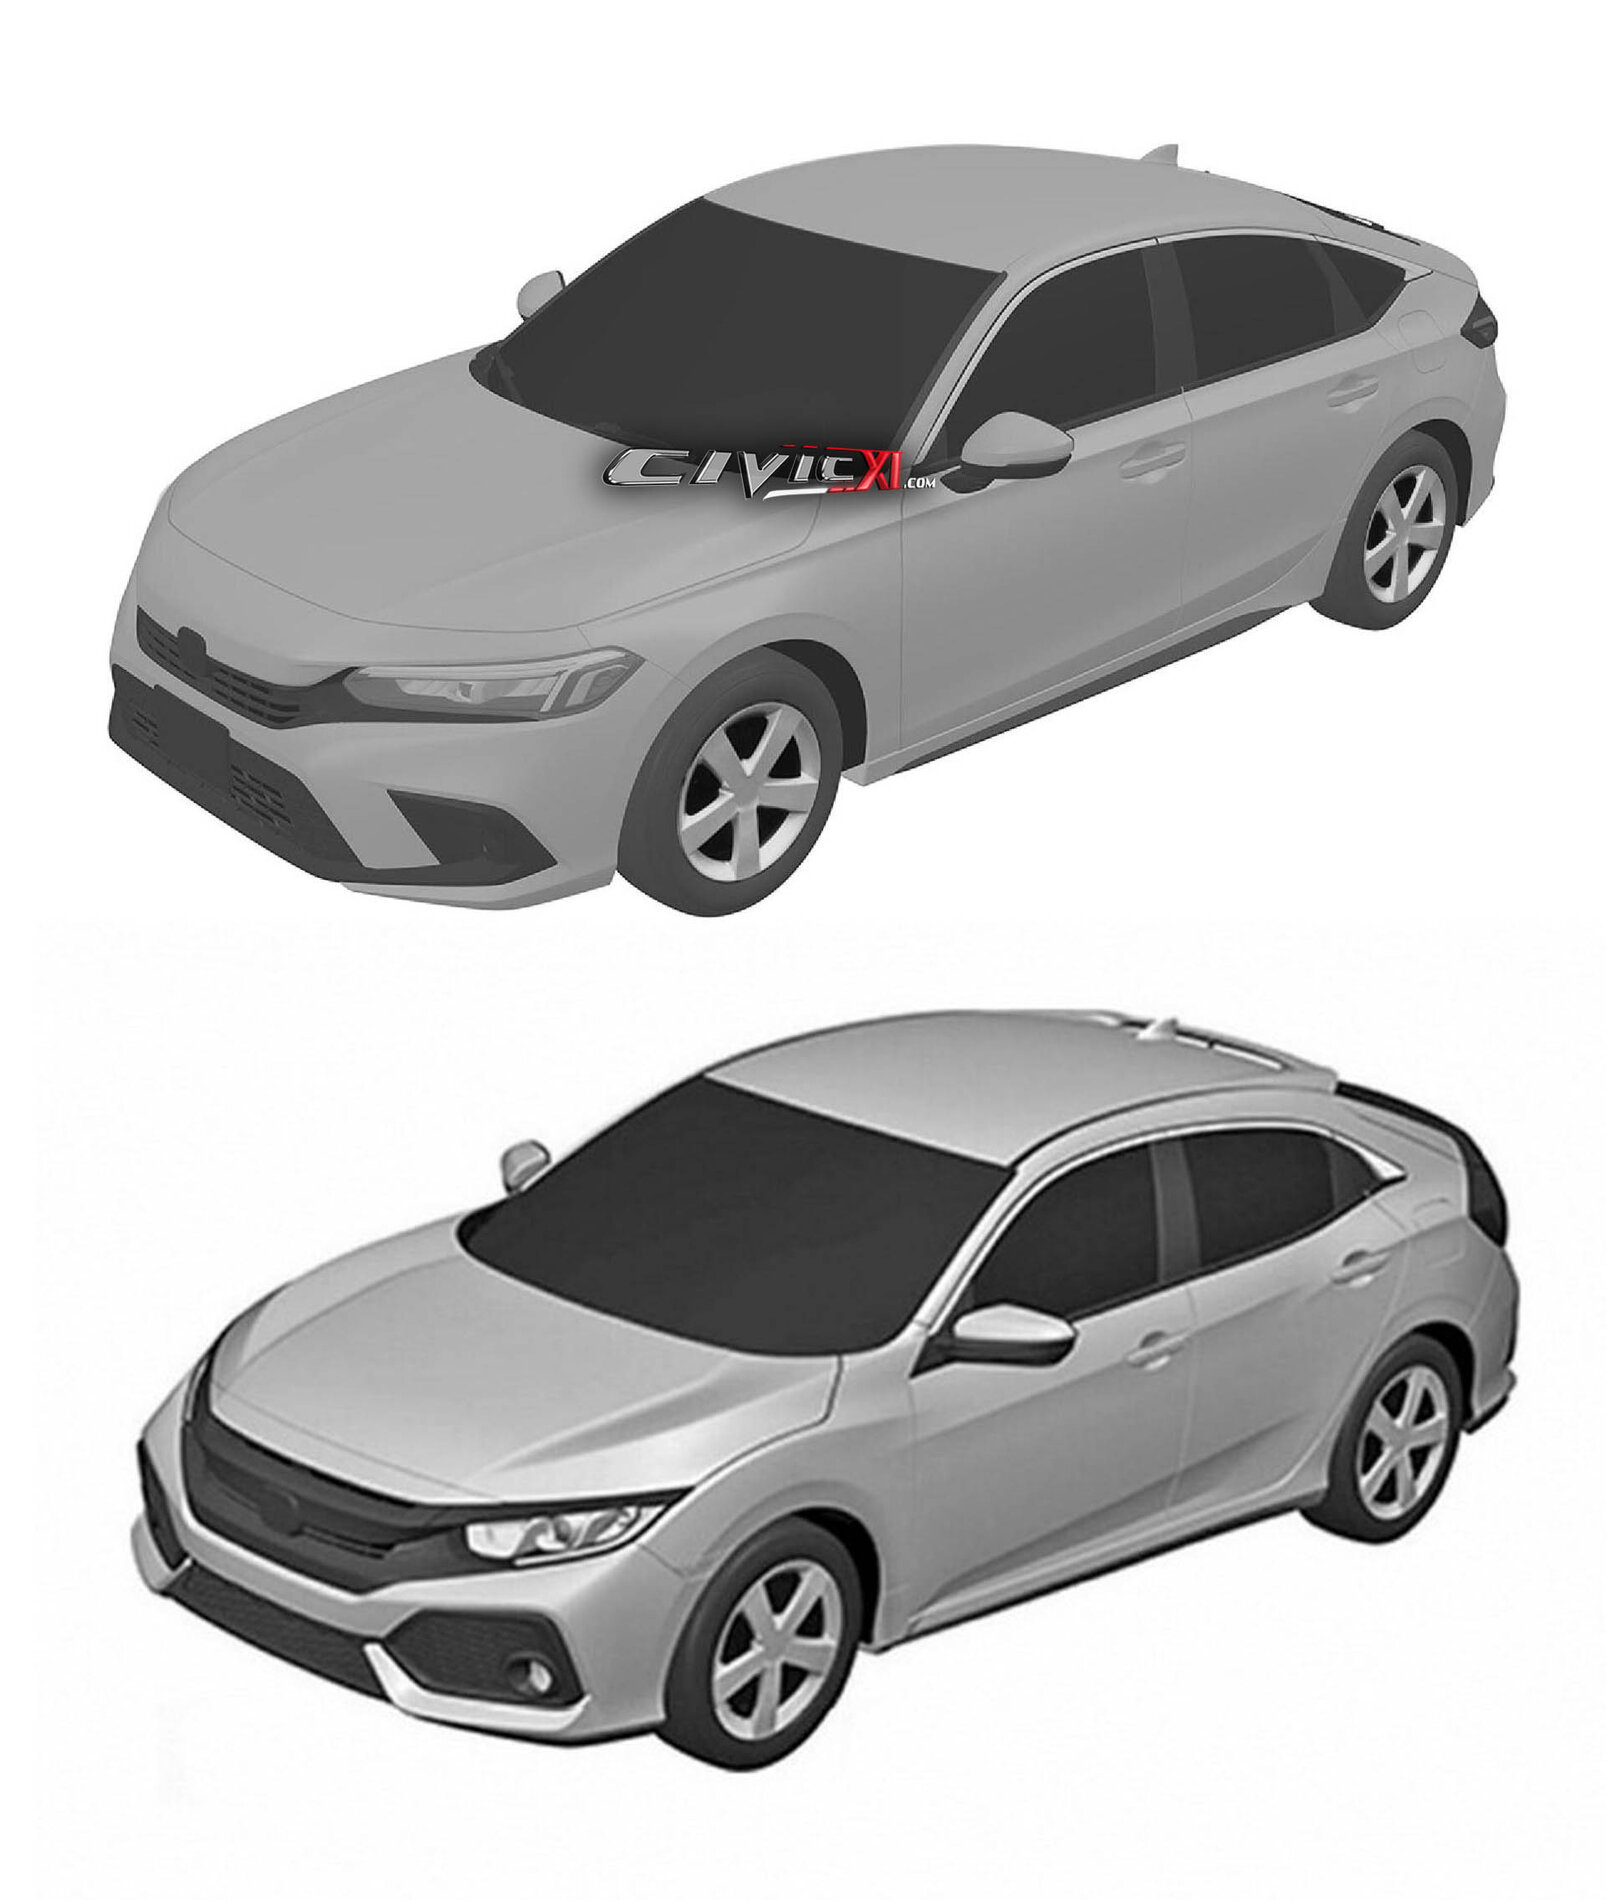 11th Gen Honda Civic Exclusive: 11th Gen 2022 Civic (Hatchback) Fully Revealed in Official Honda Patent Images 11th vs 10th Gen Civic Hatchback Front Quarter